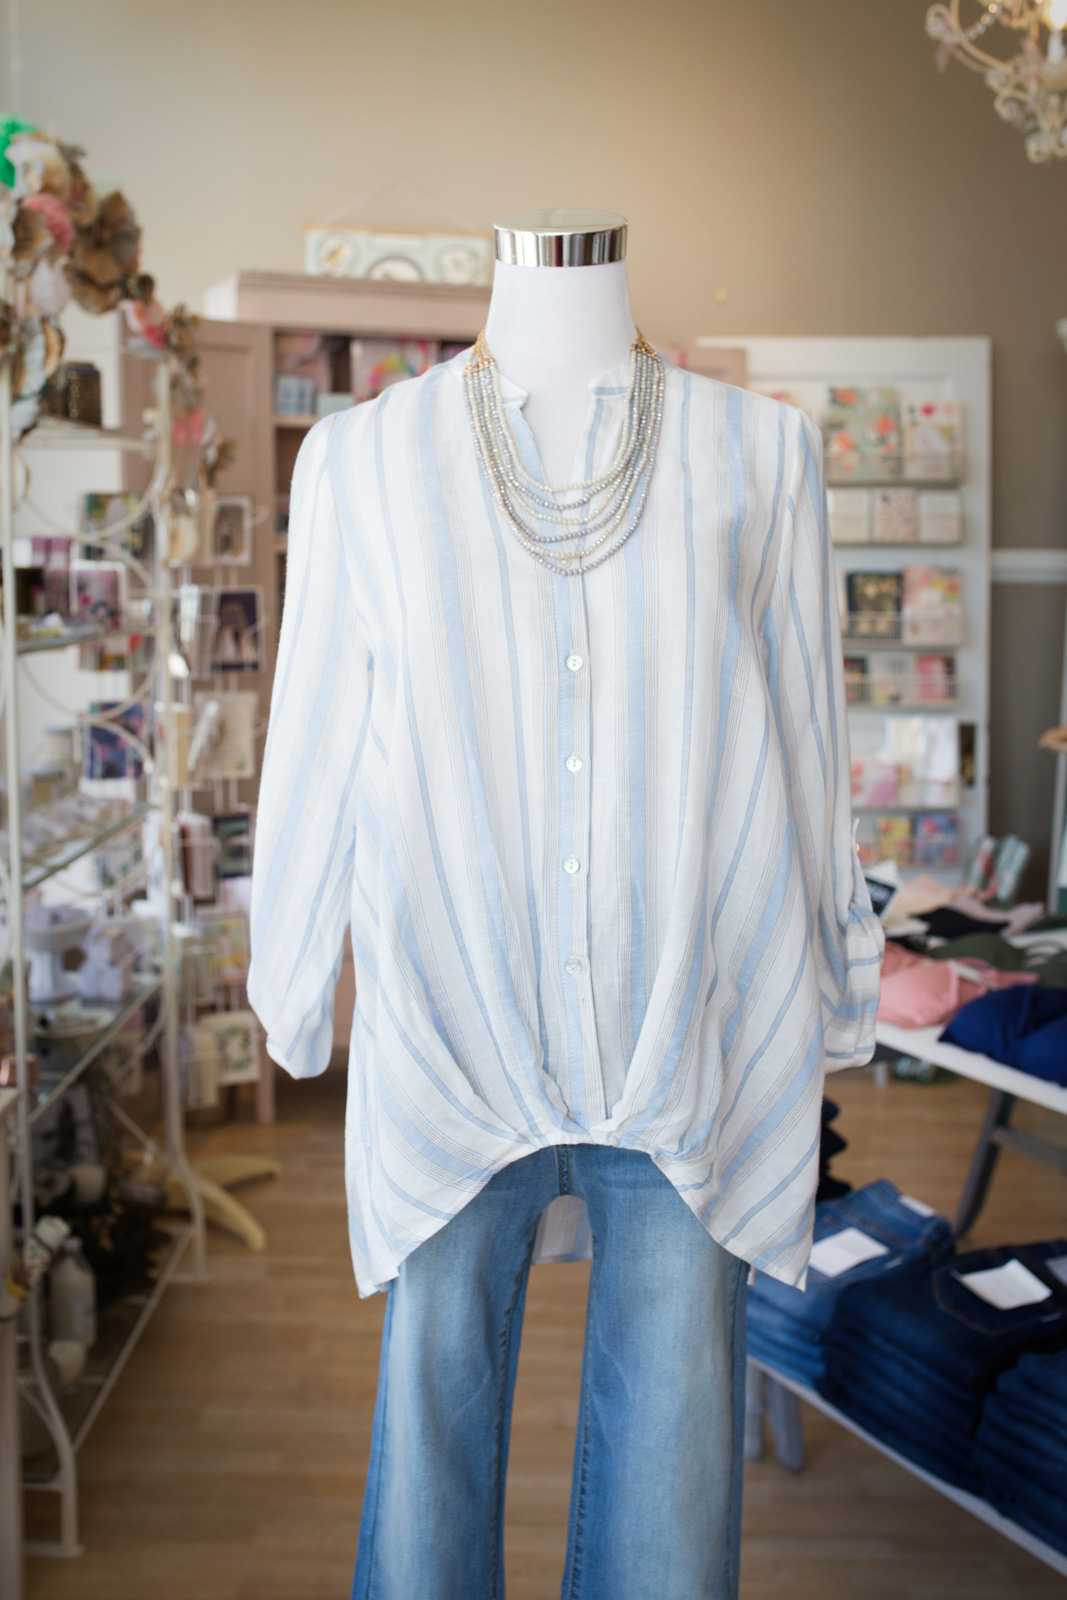 Meadow boutique seattle retail clothing store Yuliya Rae photography branding services-14.jpg